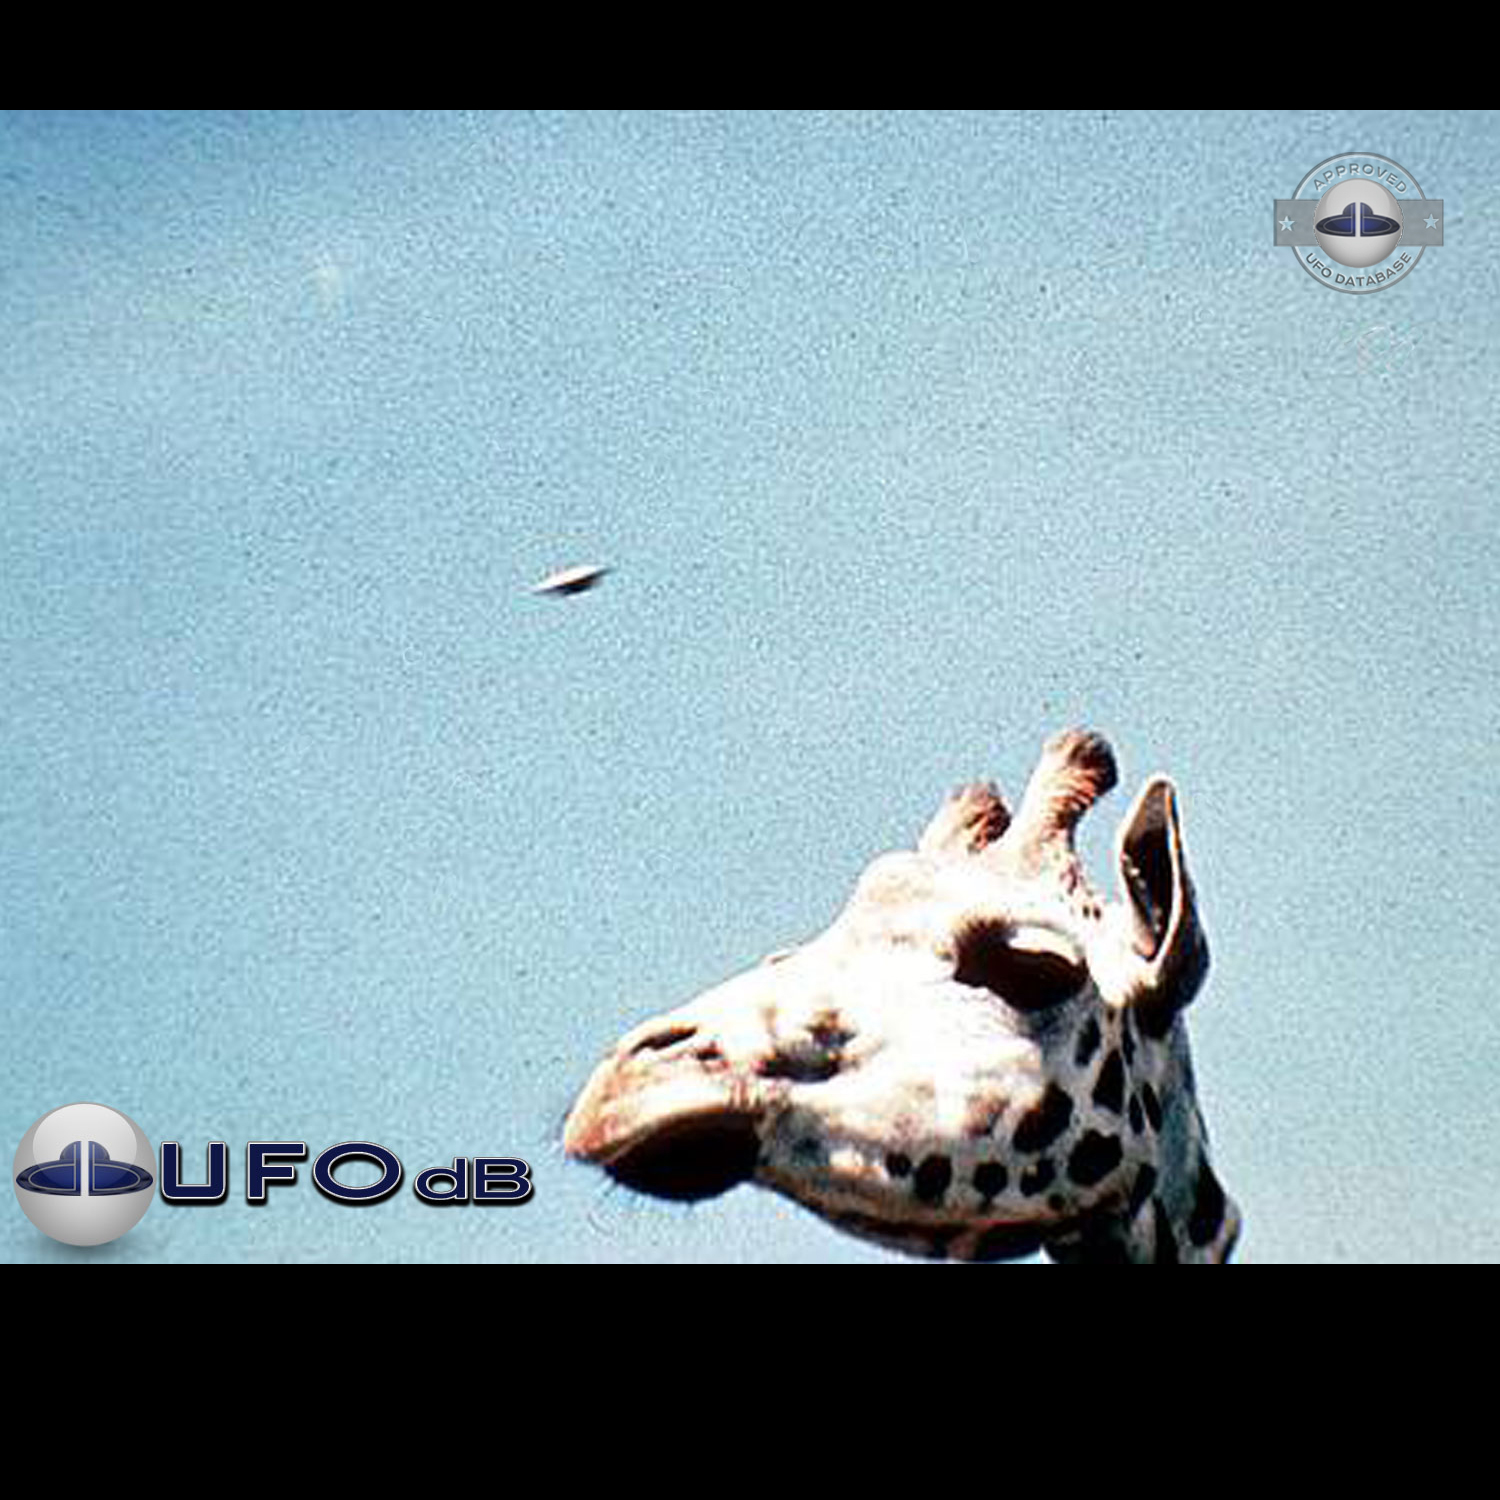 UFO picture shot in Plymouth Zoo which was located in Central Park UFO Picture #132-1